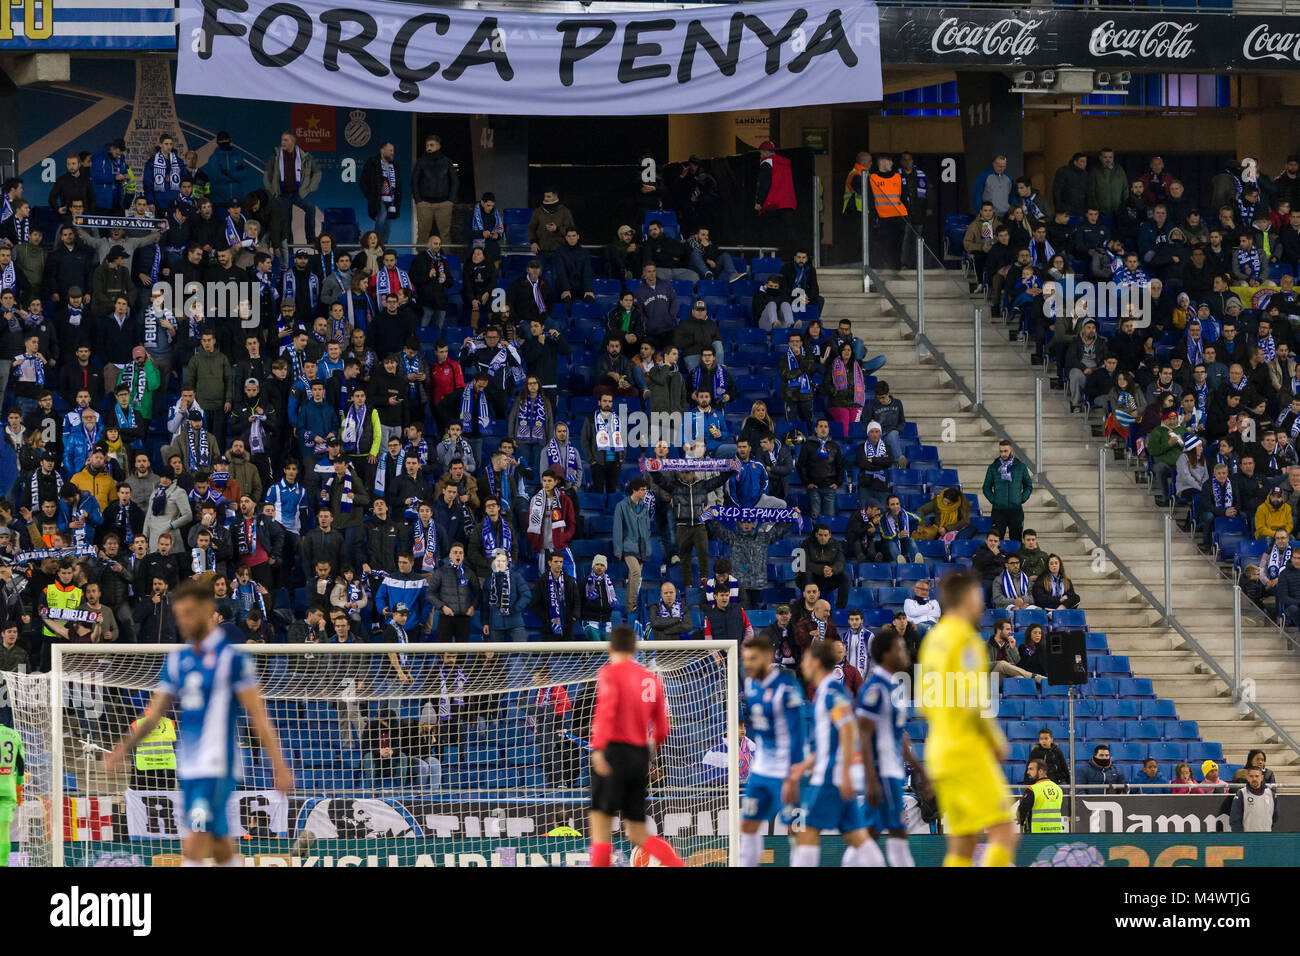 Barcelona, Spain. 18th Feb, 2018. Banner in support to the Penya Juventut of Badalona Basket team during the match between RCD Espanyol and Villarreal, for the round 24 of the Liga Santander, played at RCDE Stadium on 18th February 2018 in Barcelona, Spain. Credit: Gtres Información más Comuniación on line, S.L./Alamy Live News Stock Photo